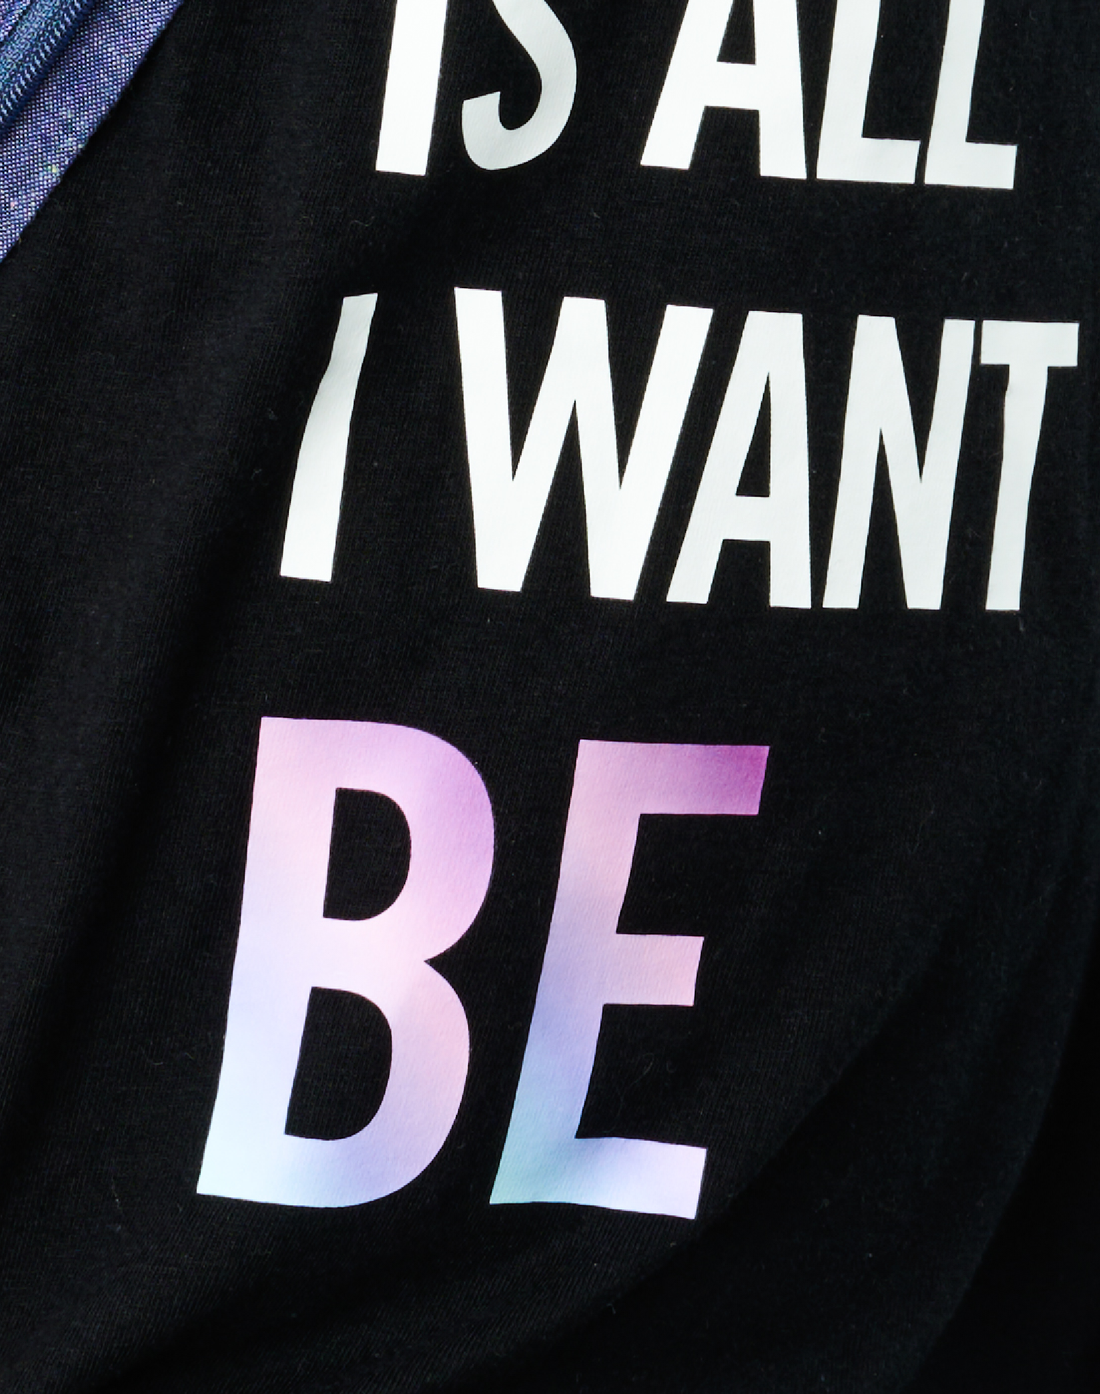 Me is All I Want To Be T-Shirt